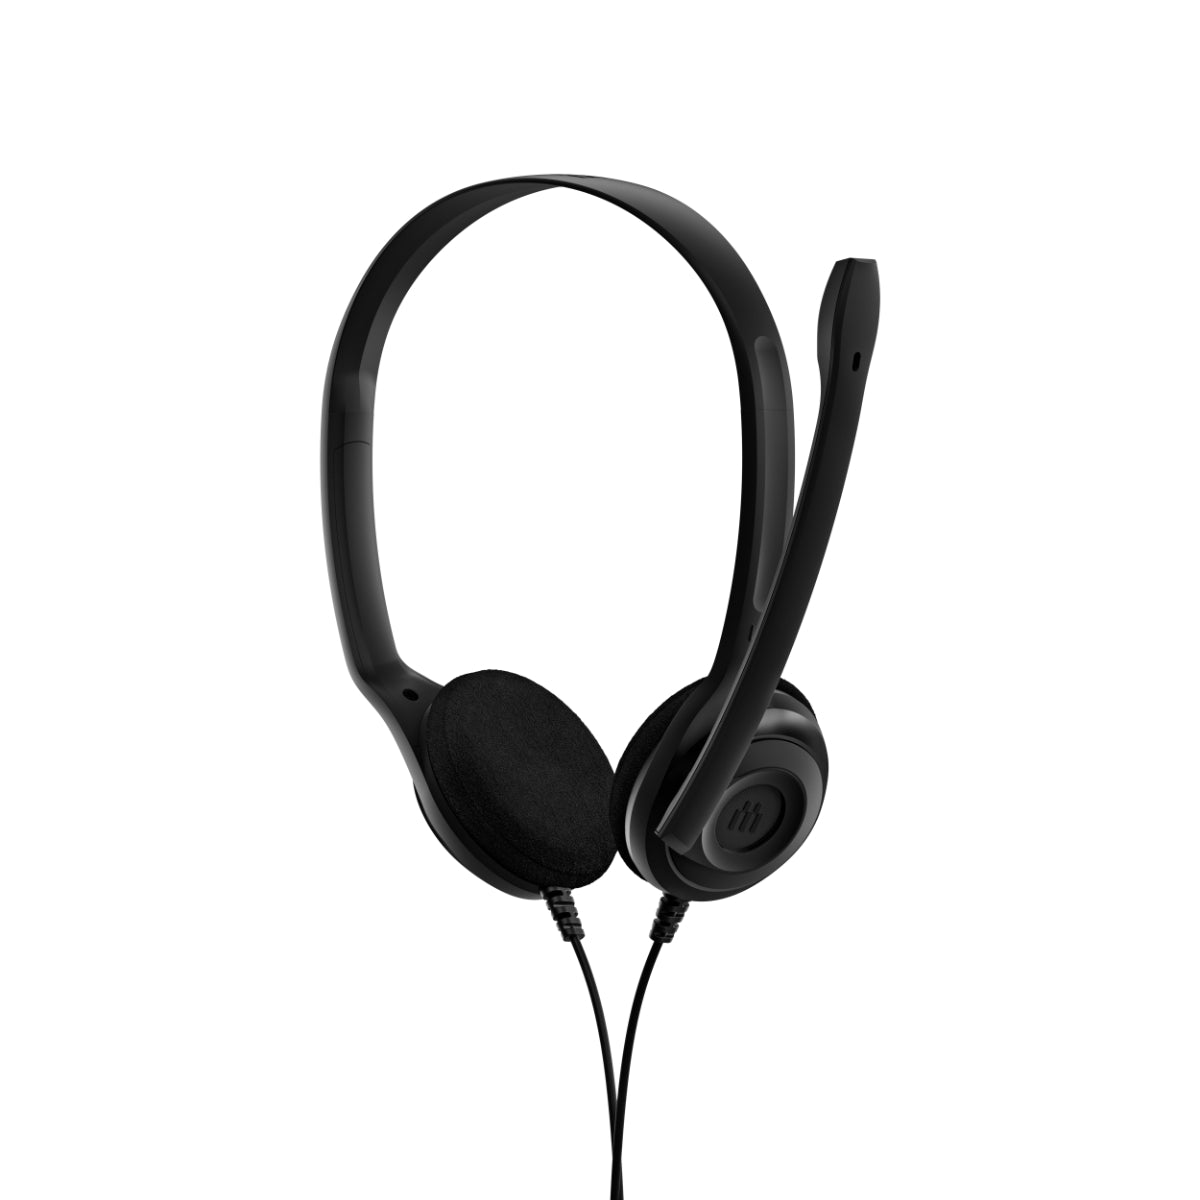 EPOS PC 3 CHAT Stereo Headset, Supra-aural, Black, 2m, Noise Cancelling Mic, 2x 3.5mm Jack